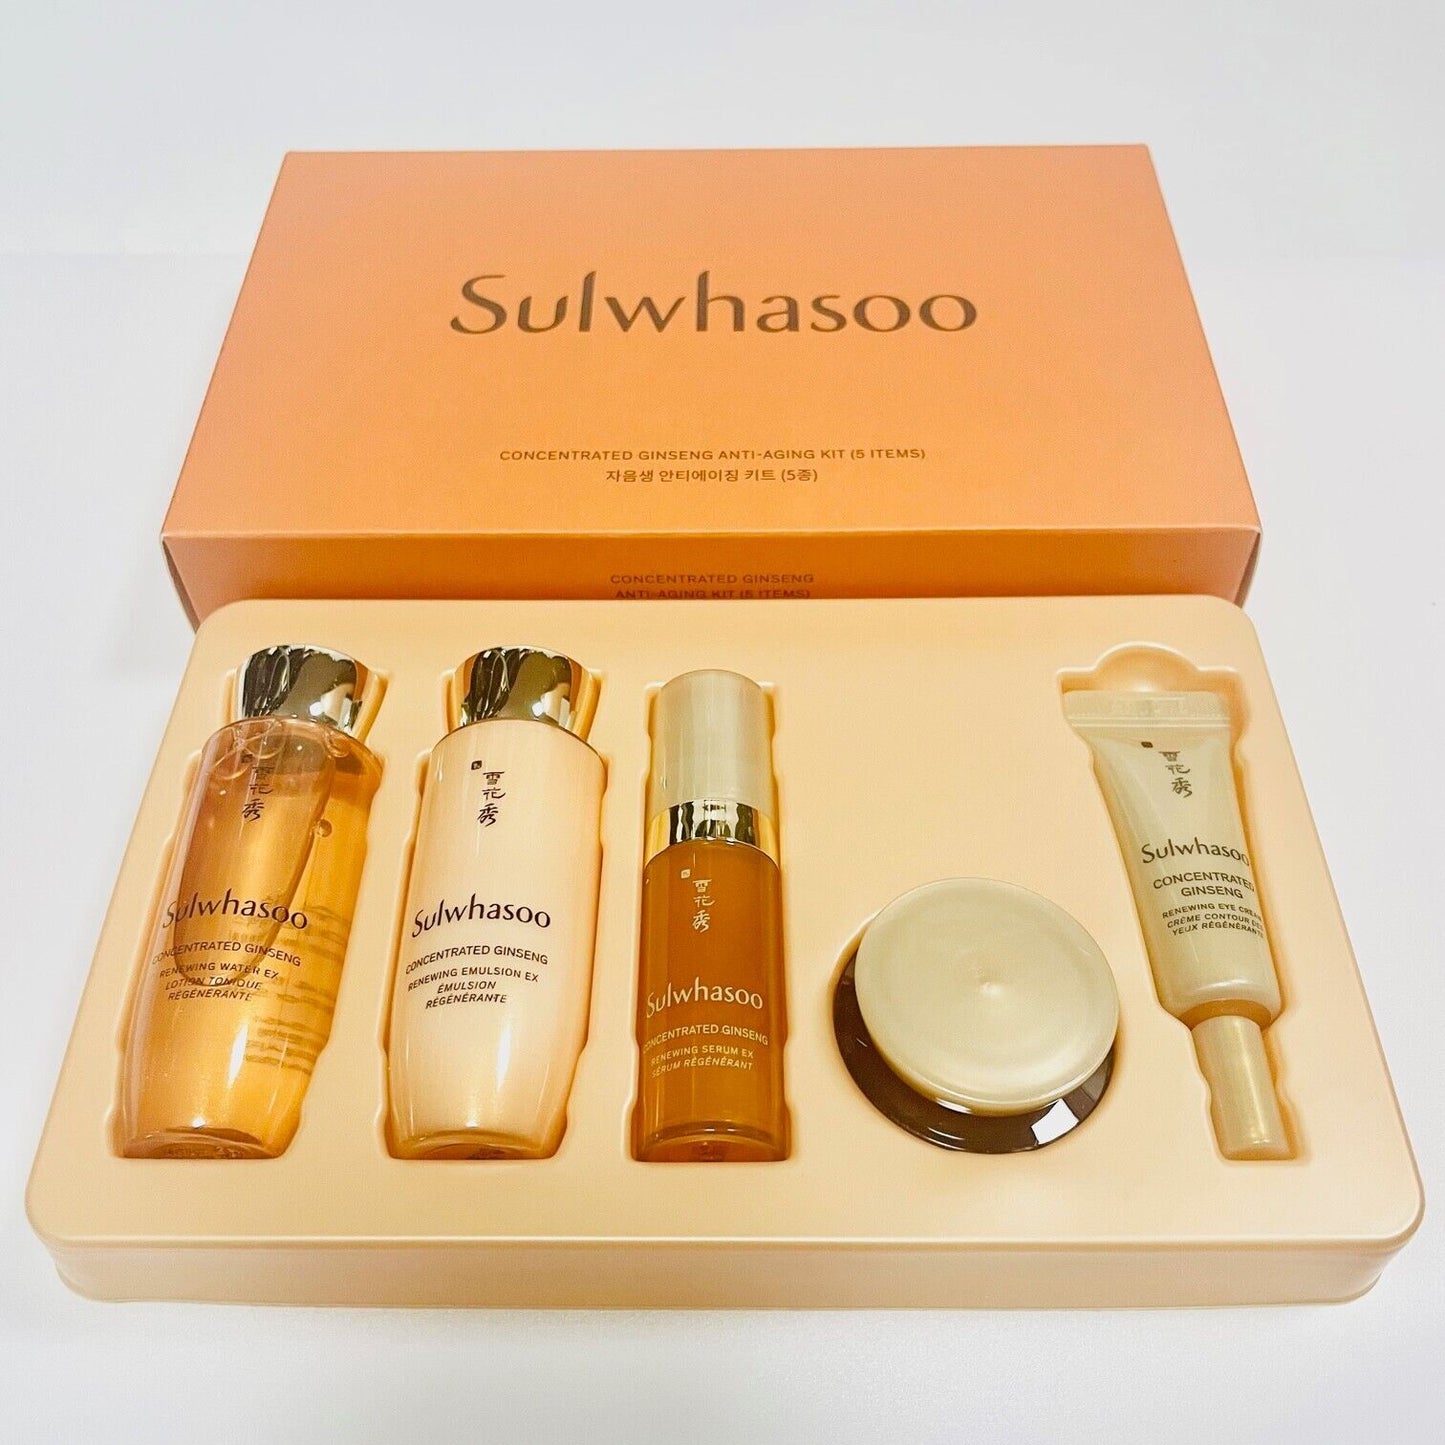 Sulwhasoo Concentrated Ginseng Anti Aging Kit (5 Items) Anti Wrinkle